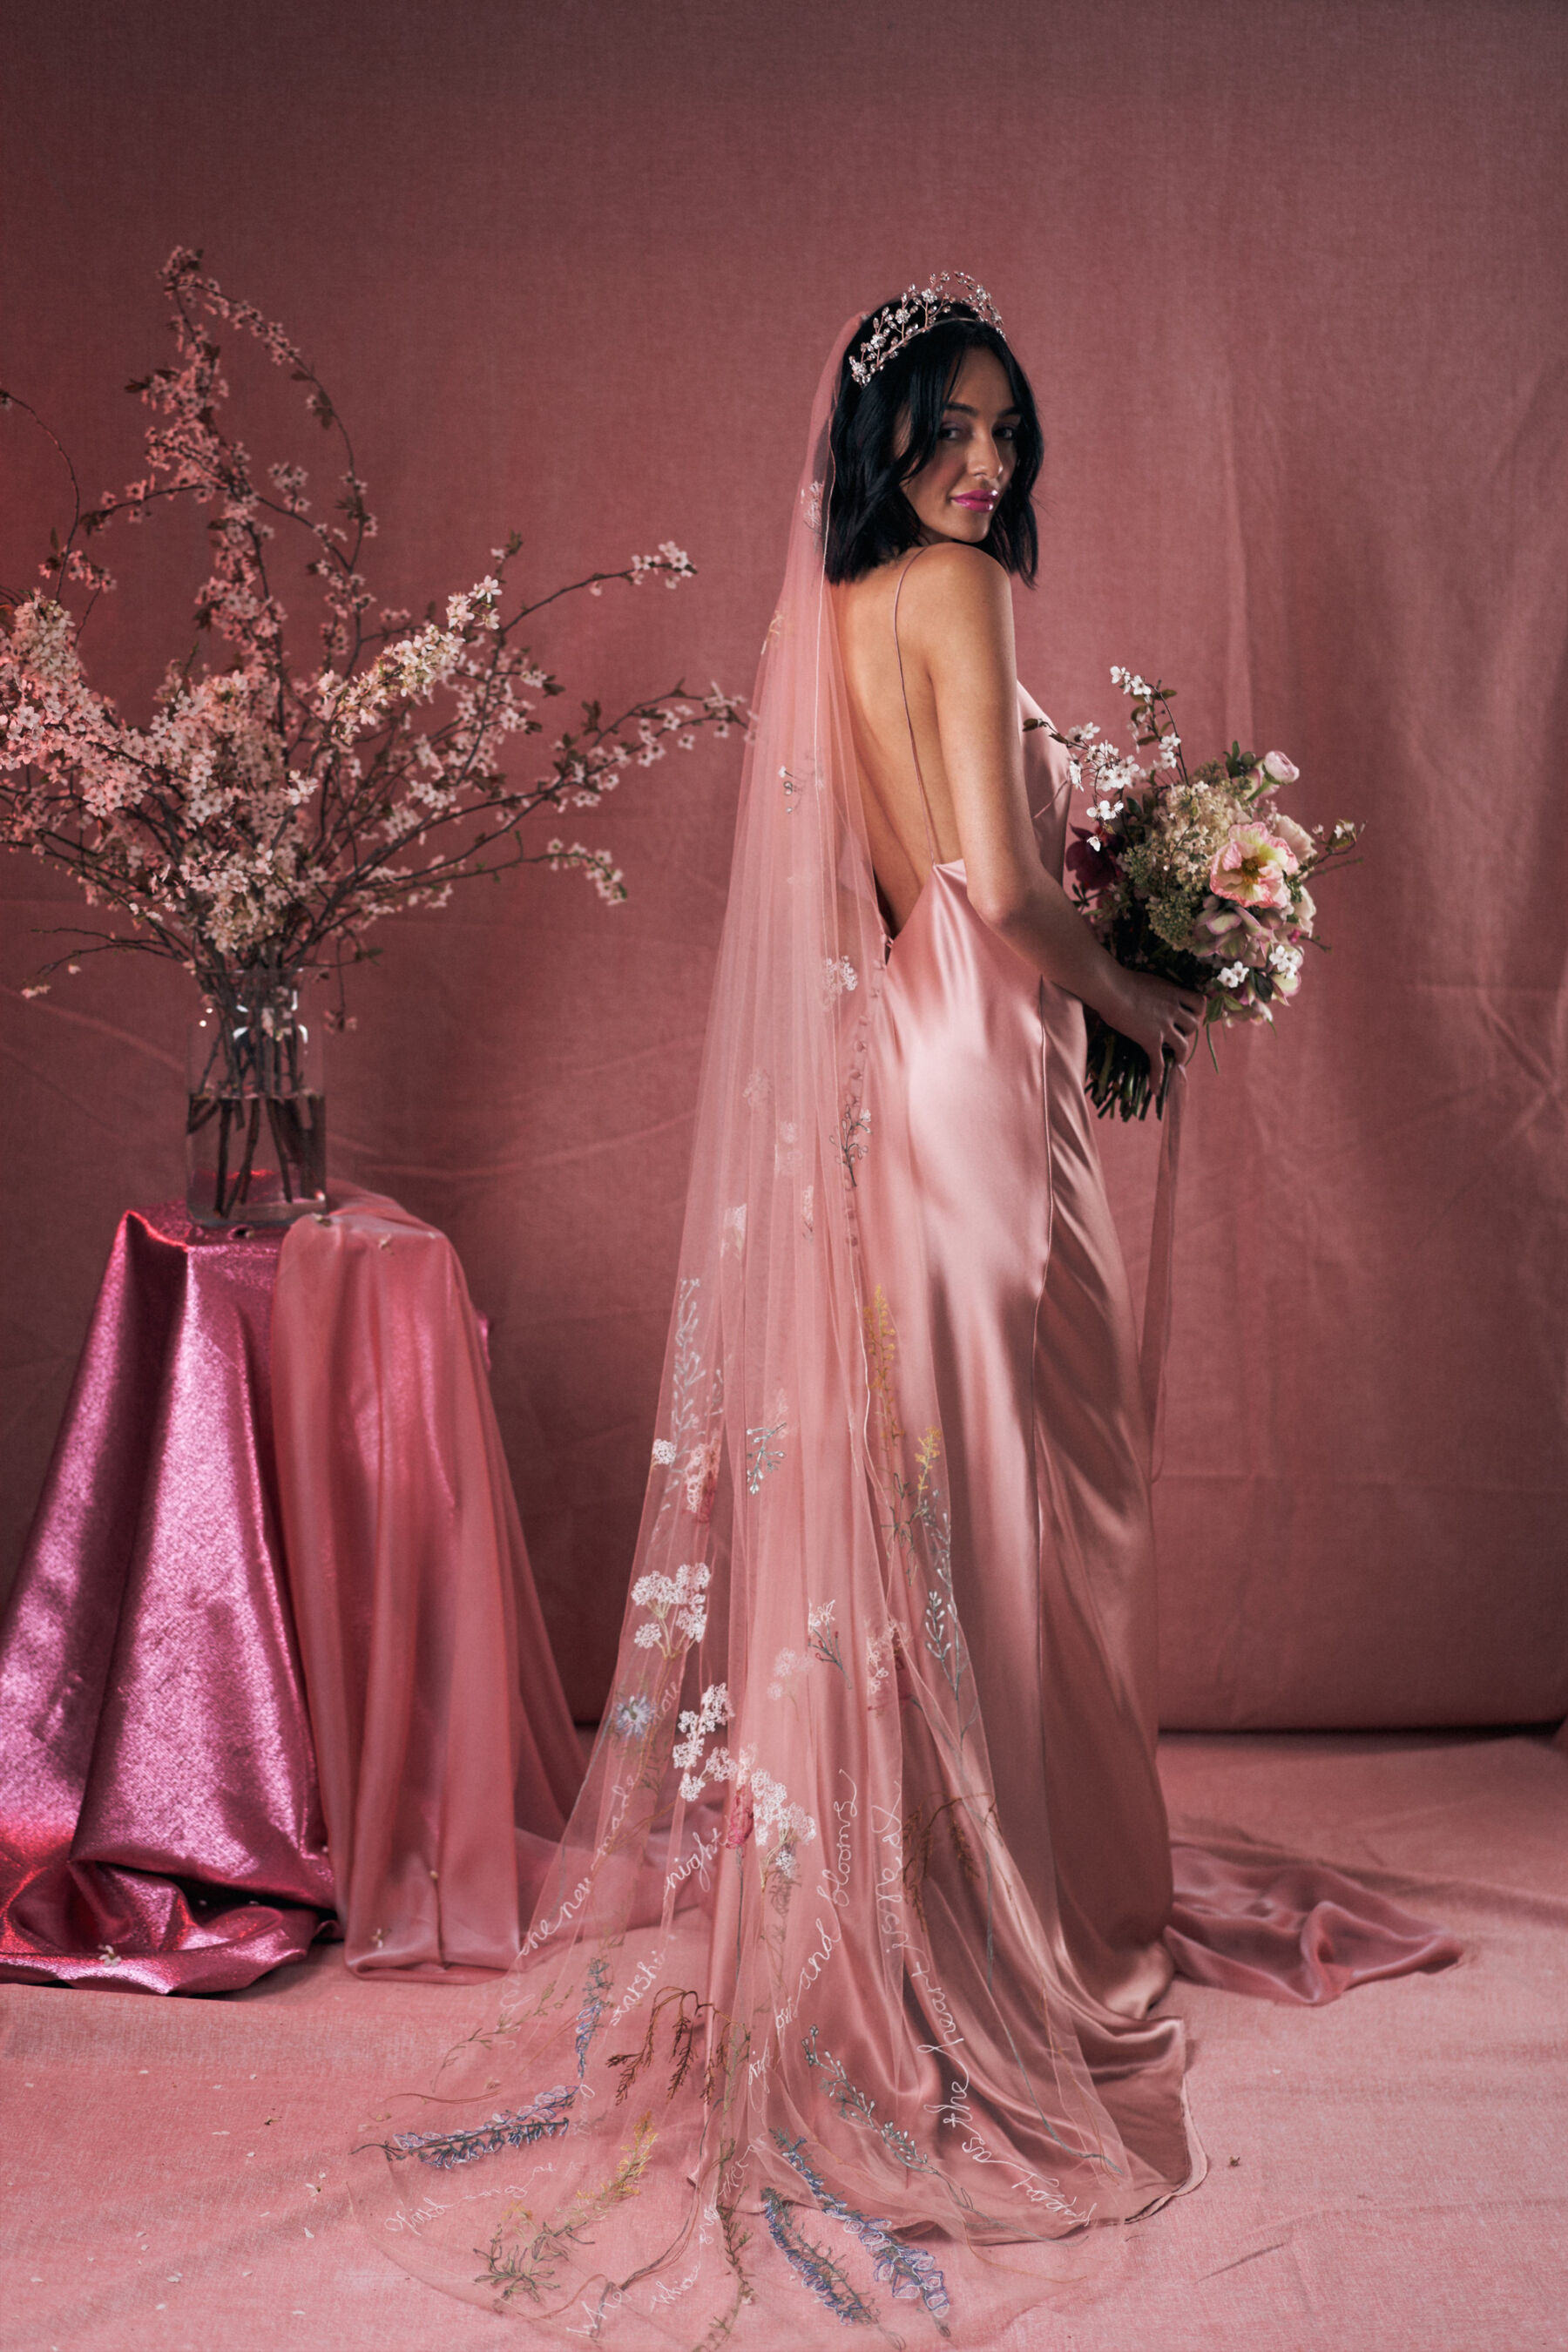 Pink wedding dress by Kate Beaumont & pink embroidered wedding veil by Daisy Sheldon.